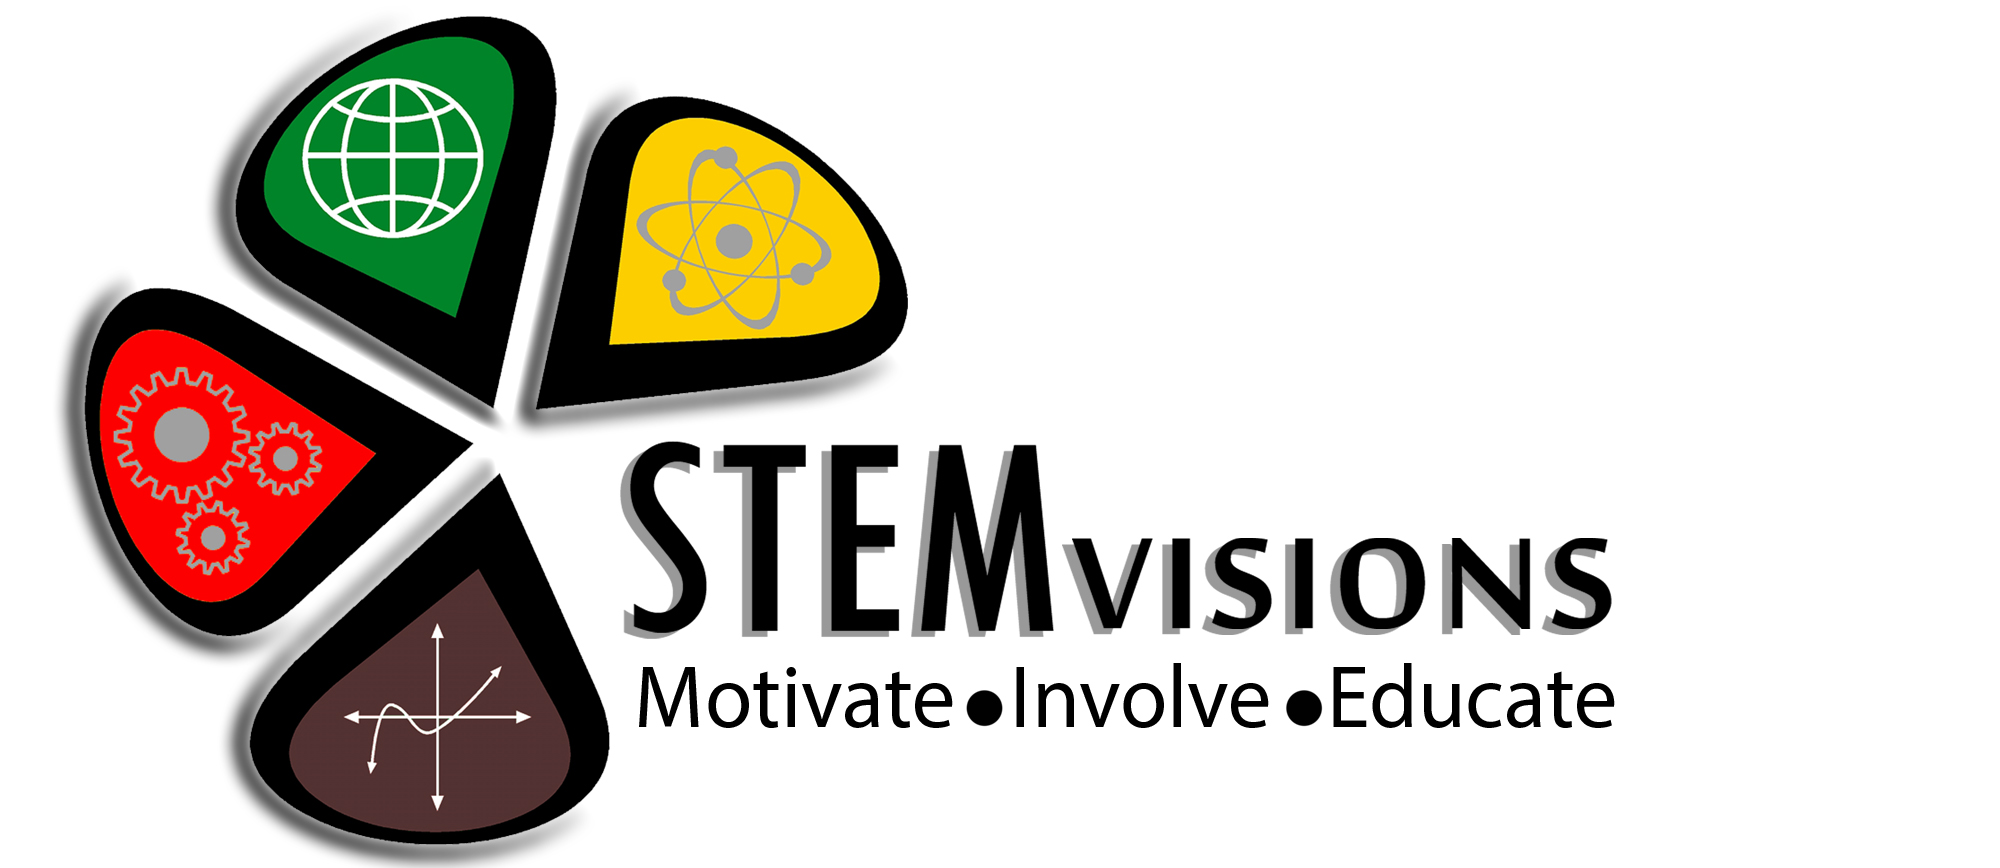 Welcome to STEM Visions